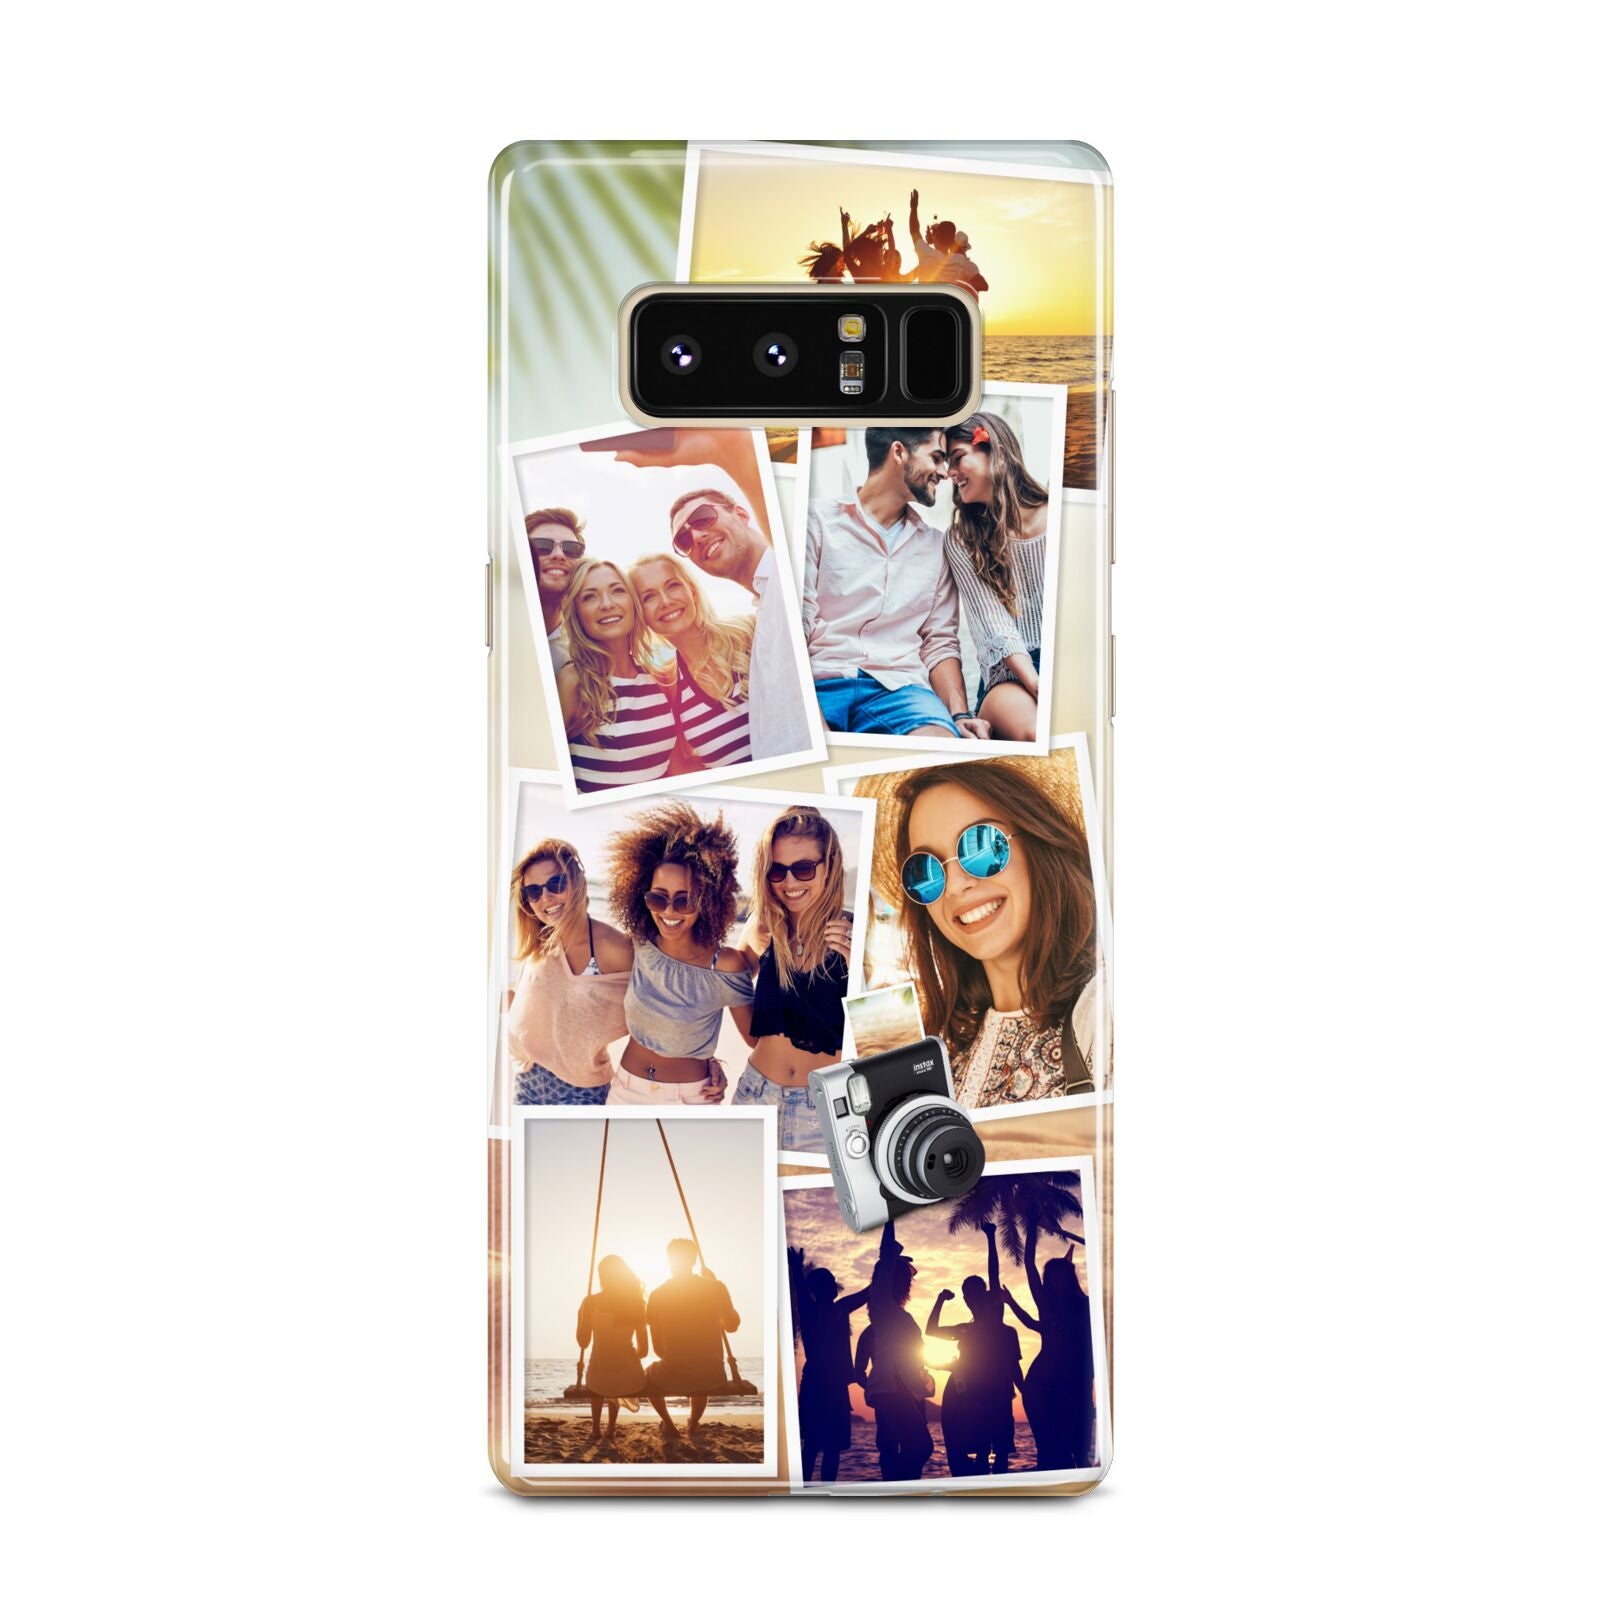 Personalised Summer Holiday Photos Samsung Galaxy Note 8 Case